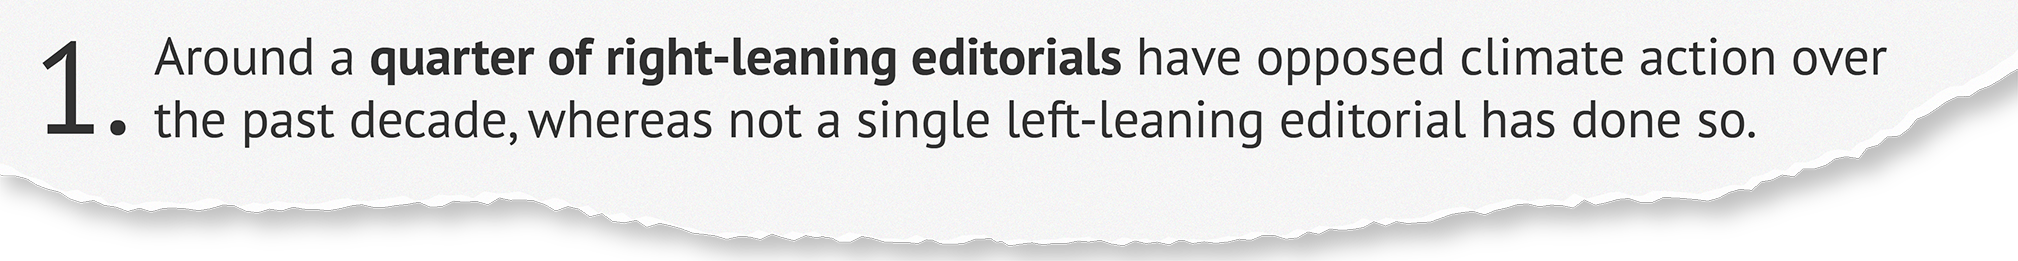 Around a quarter of right-leaning editorials have opposed climate action over the past decade, whereas not a single left-leaning editorial has done so.